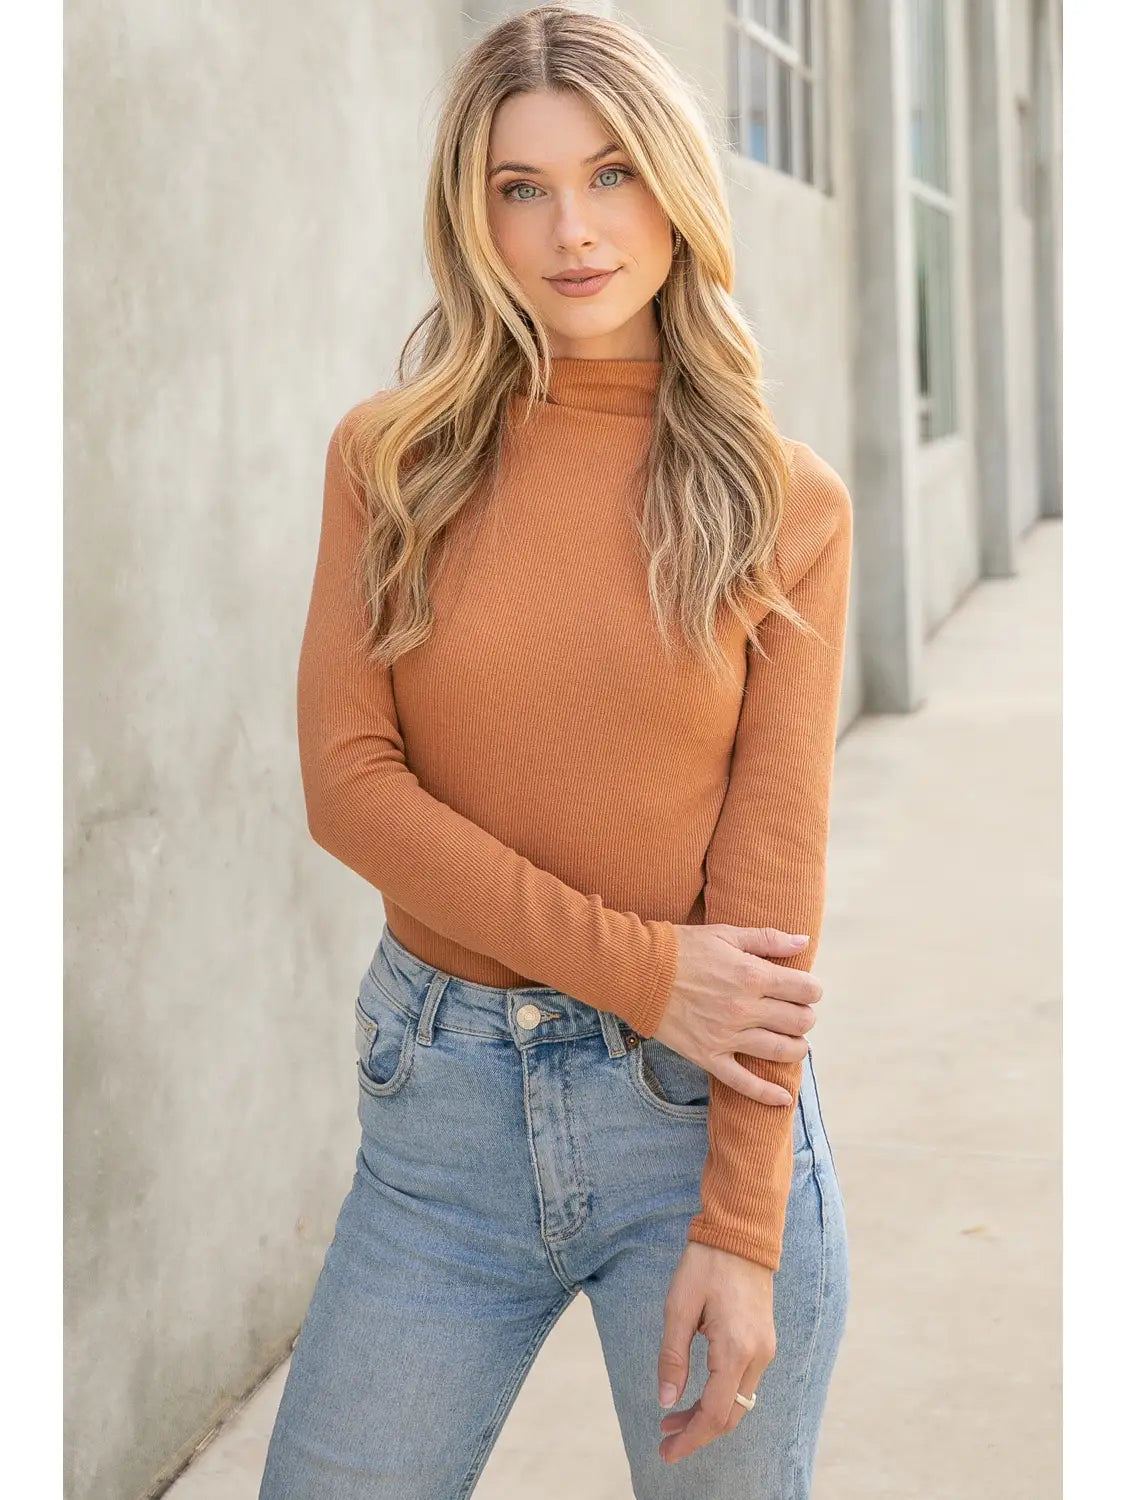 Golden Solid Ribbed Turtle Neck Top